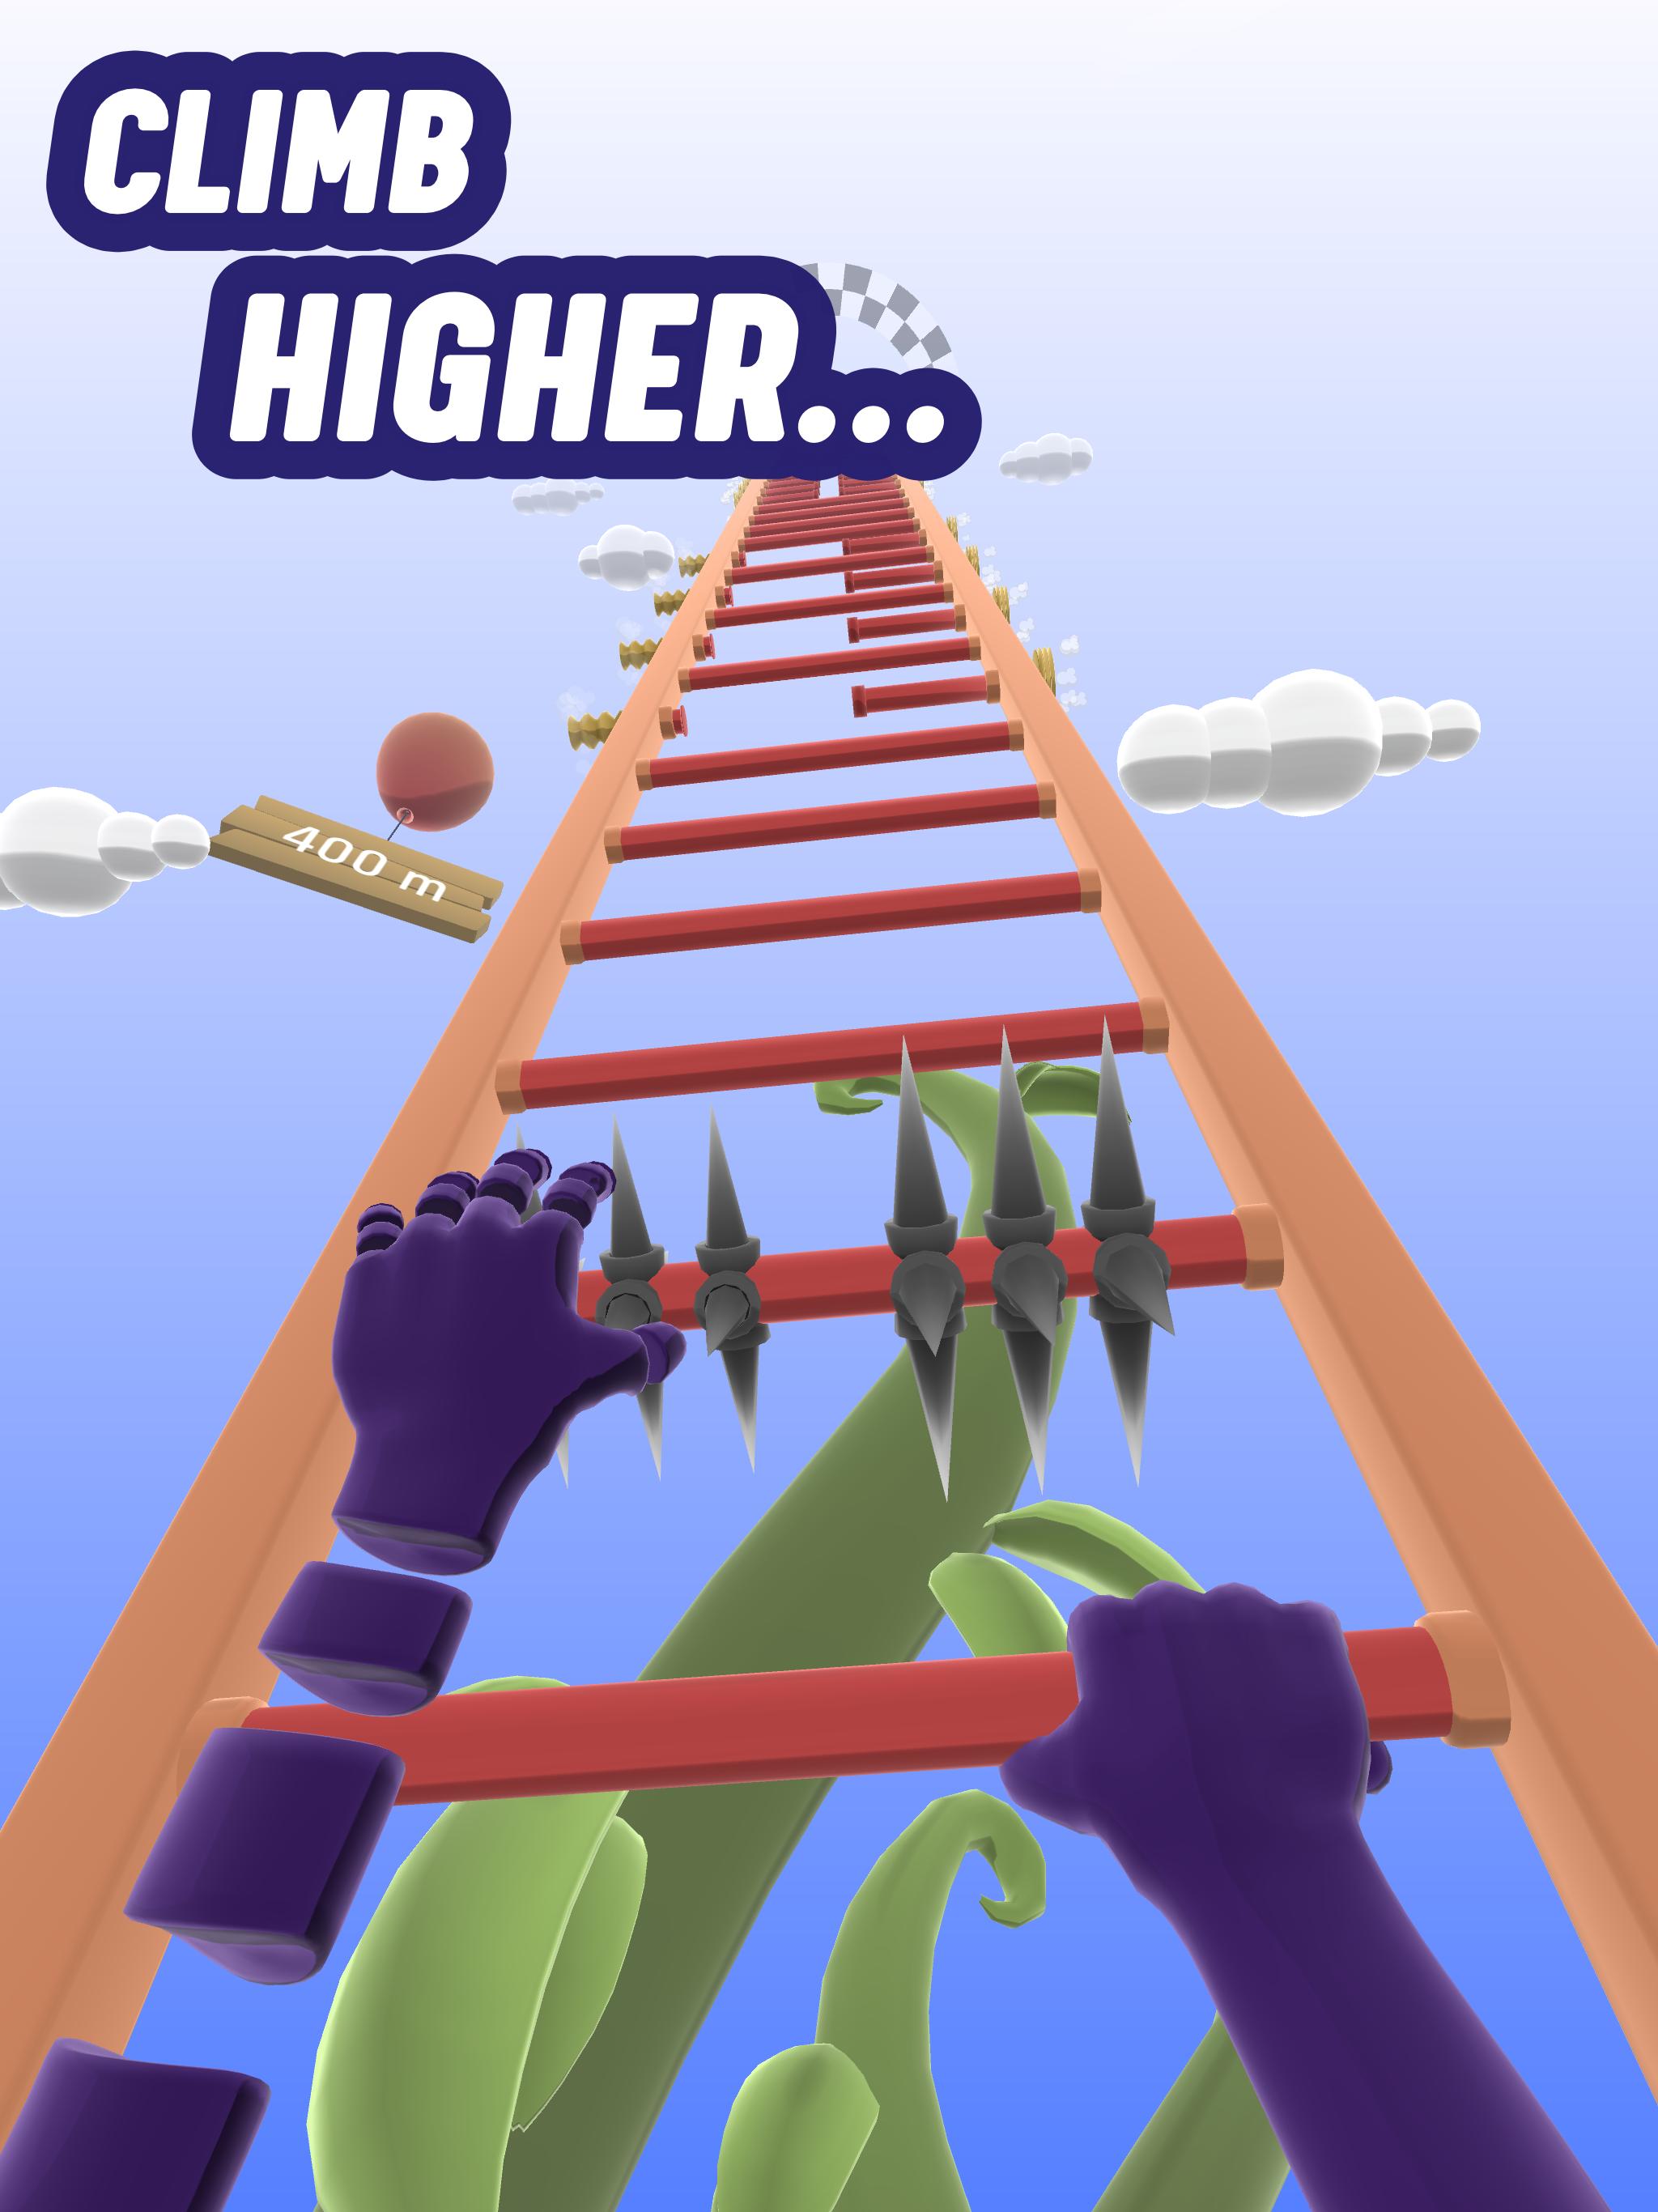 A difficult game about climbing чит